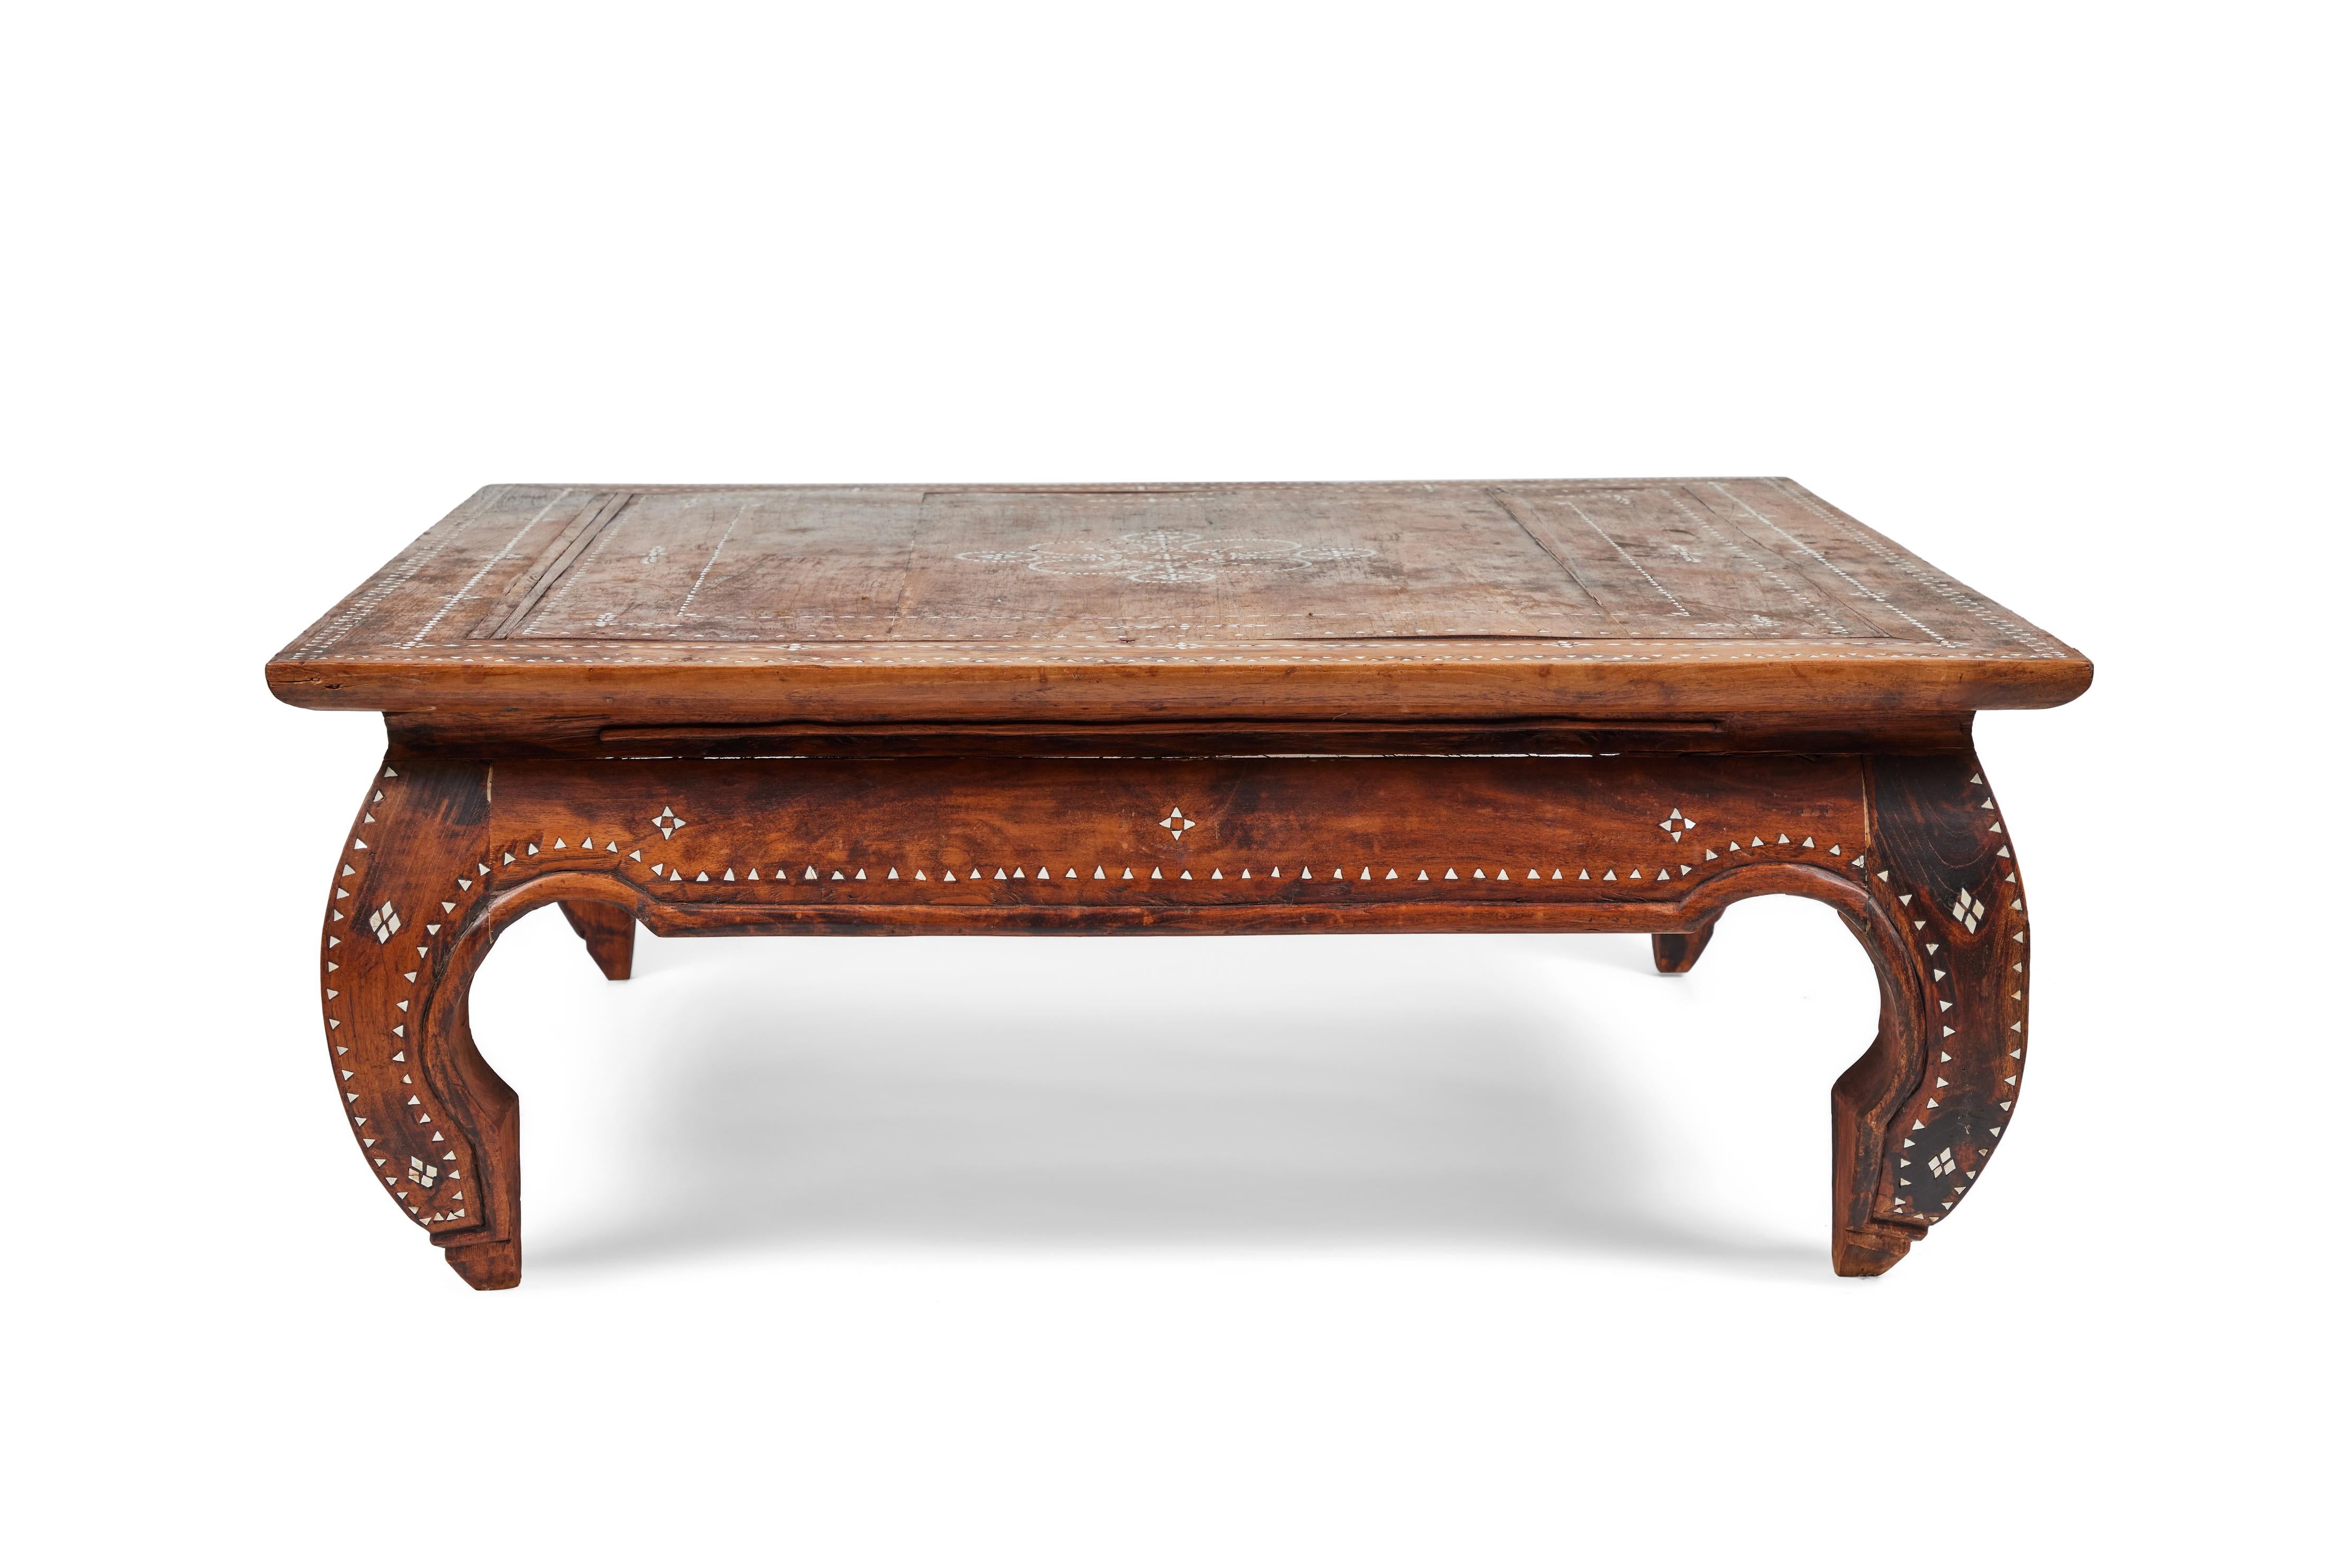 Striking large vintage hand-carved square wood coffee table is from India. It has a beautiful decorative inlaid mother of pearl design on the top, sides and down the unique inward turned legs.

